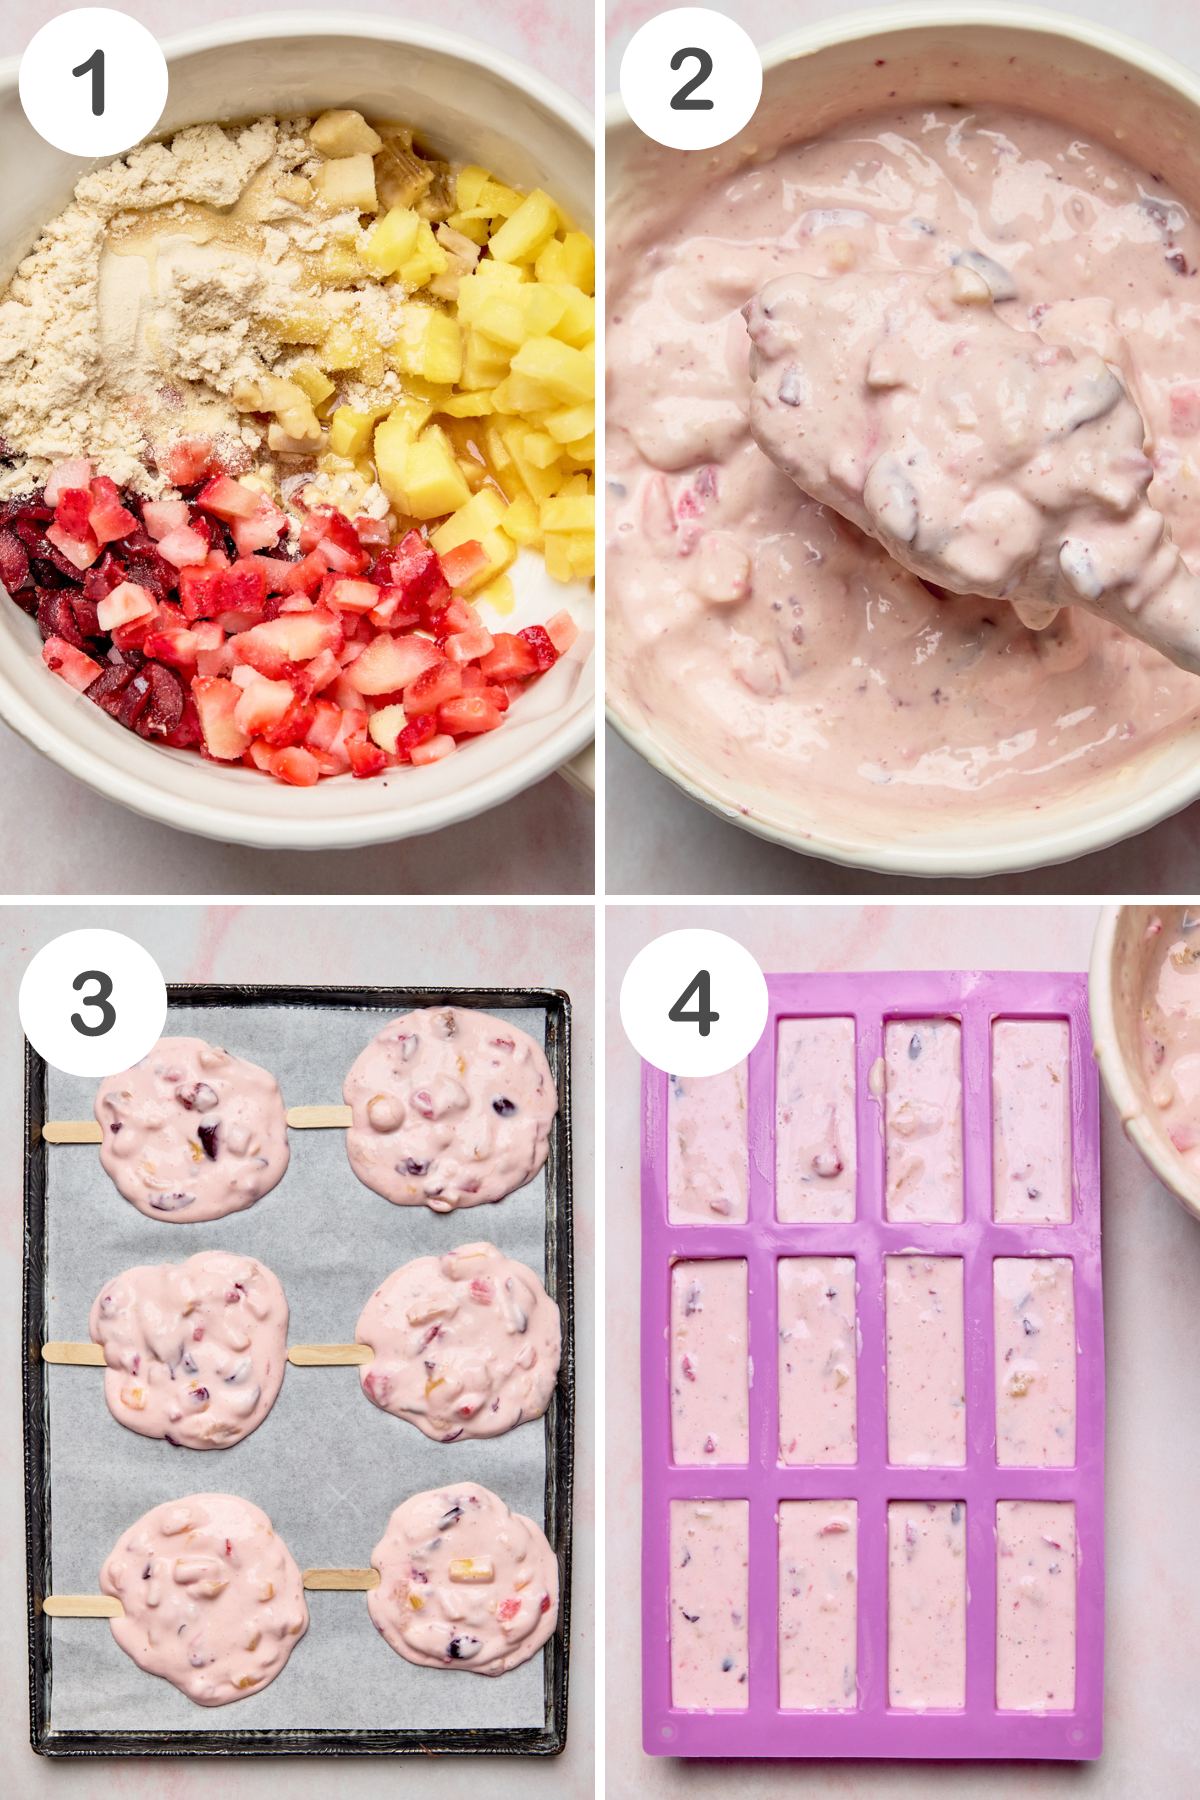 numbered step by step photos showing how to make dilly bars